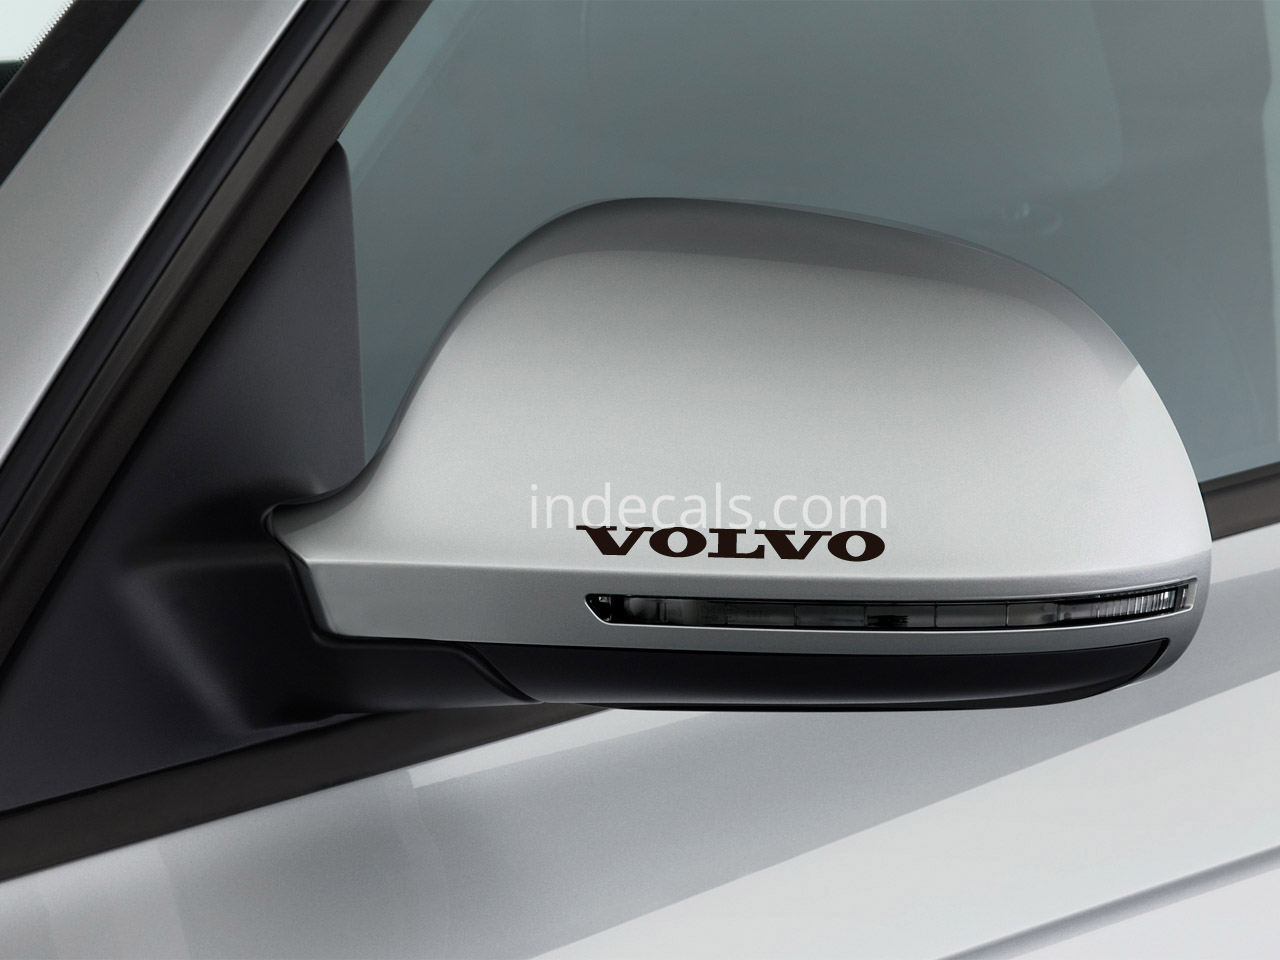 3 x Volvo Stickers for Mirrors - Black